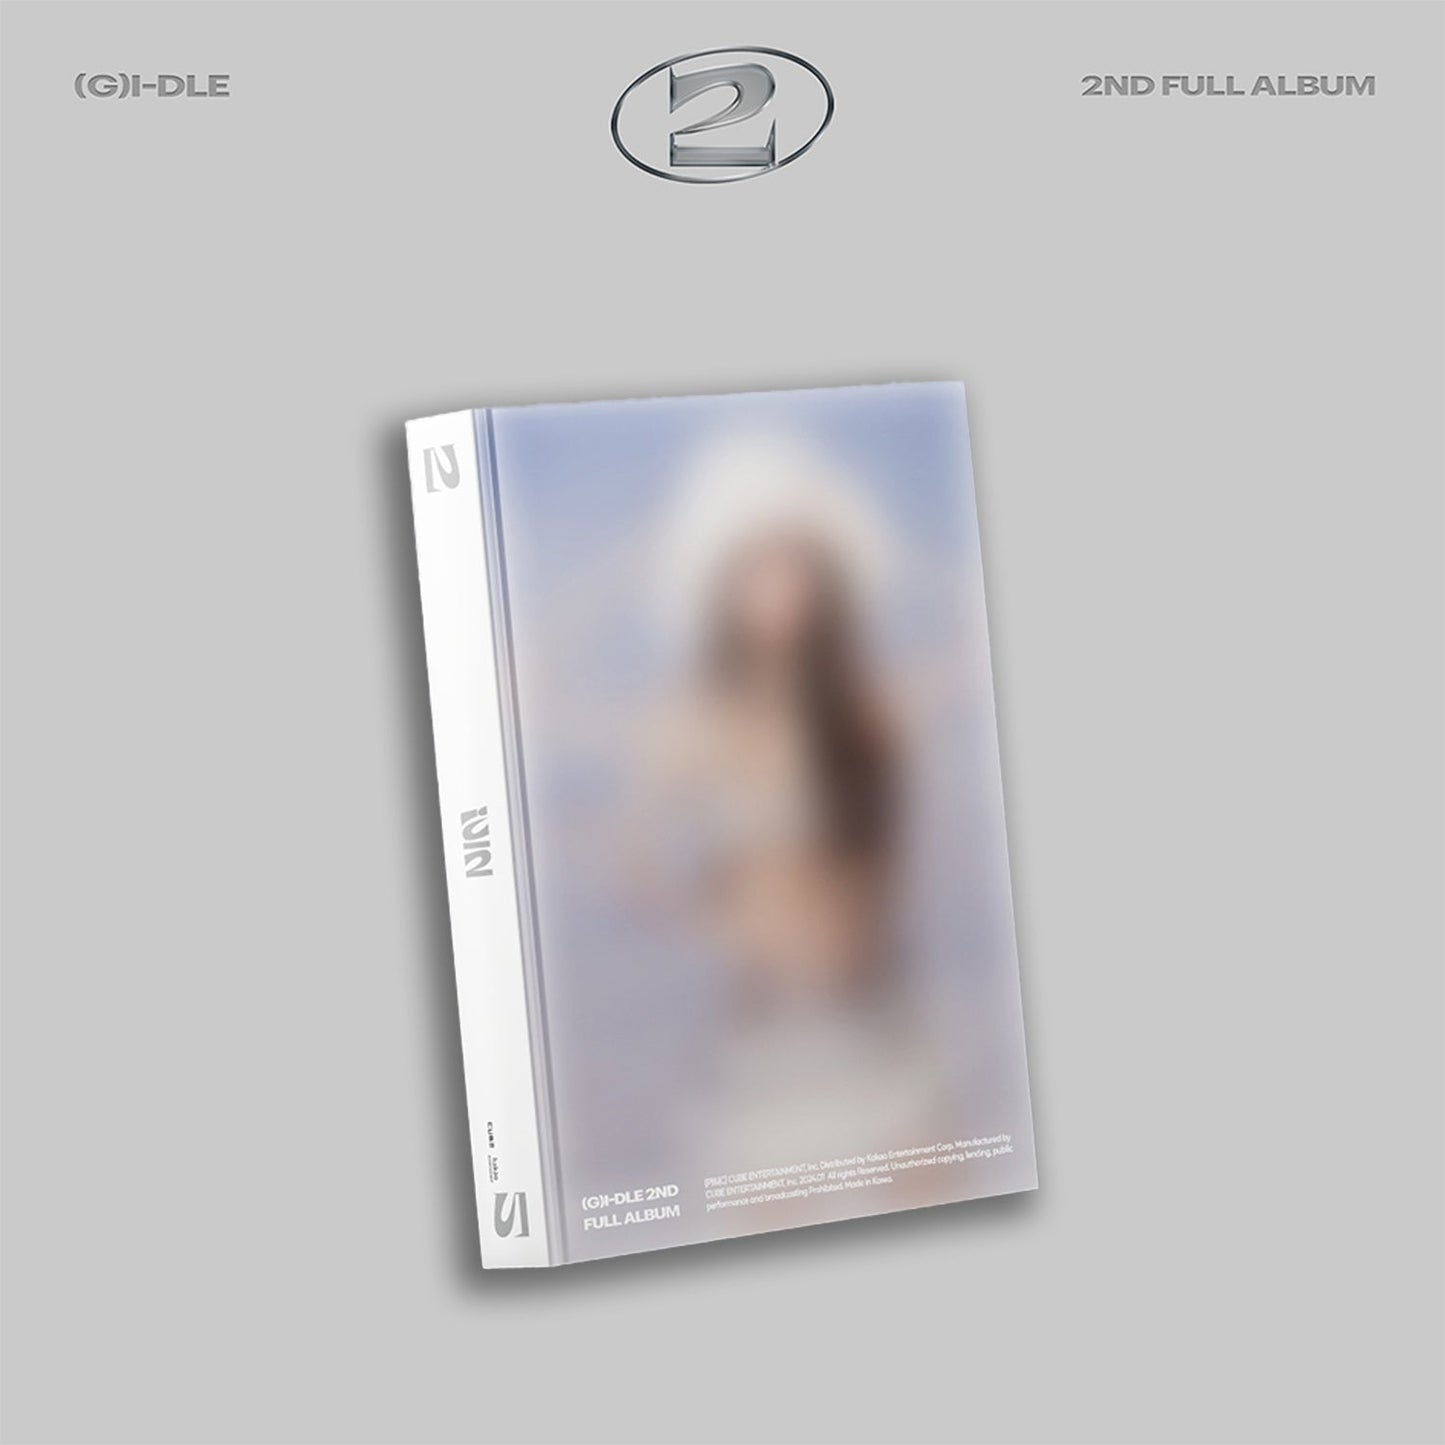 (G)I-DLE 2ND ALBUM '2' 1 VERSION COVER